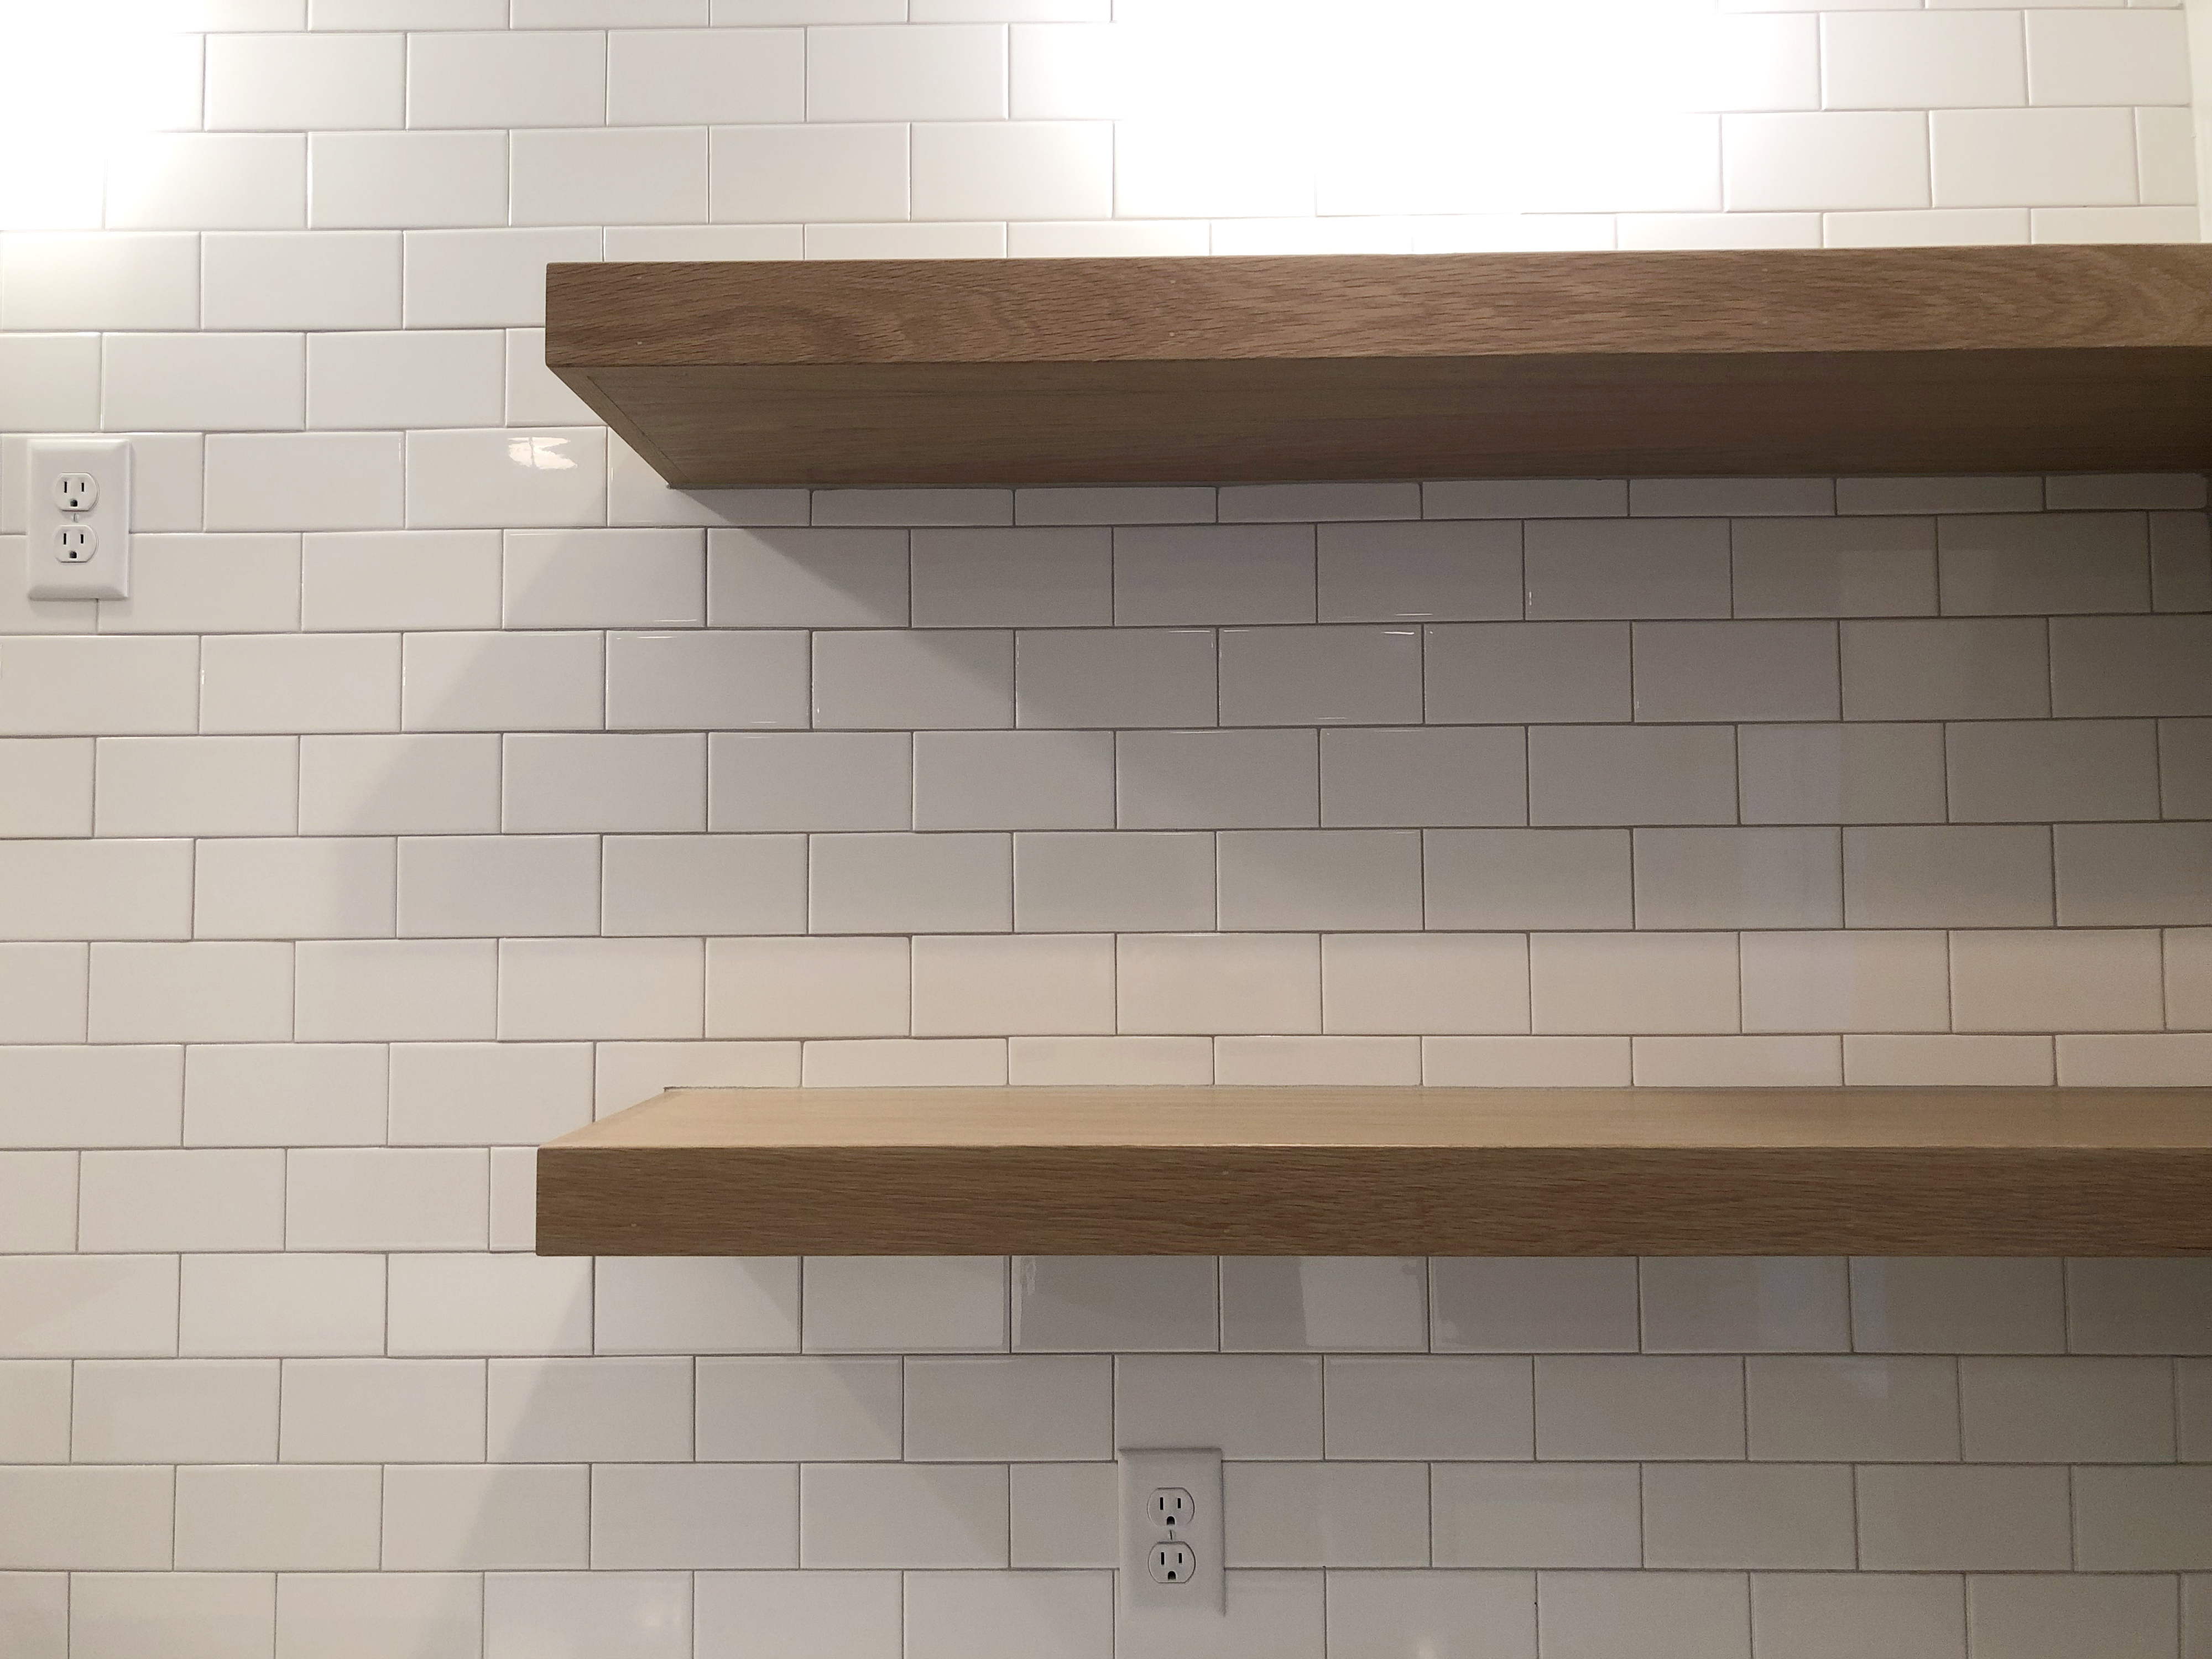 wood shelves against a subway tile wall in a kitchen